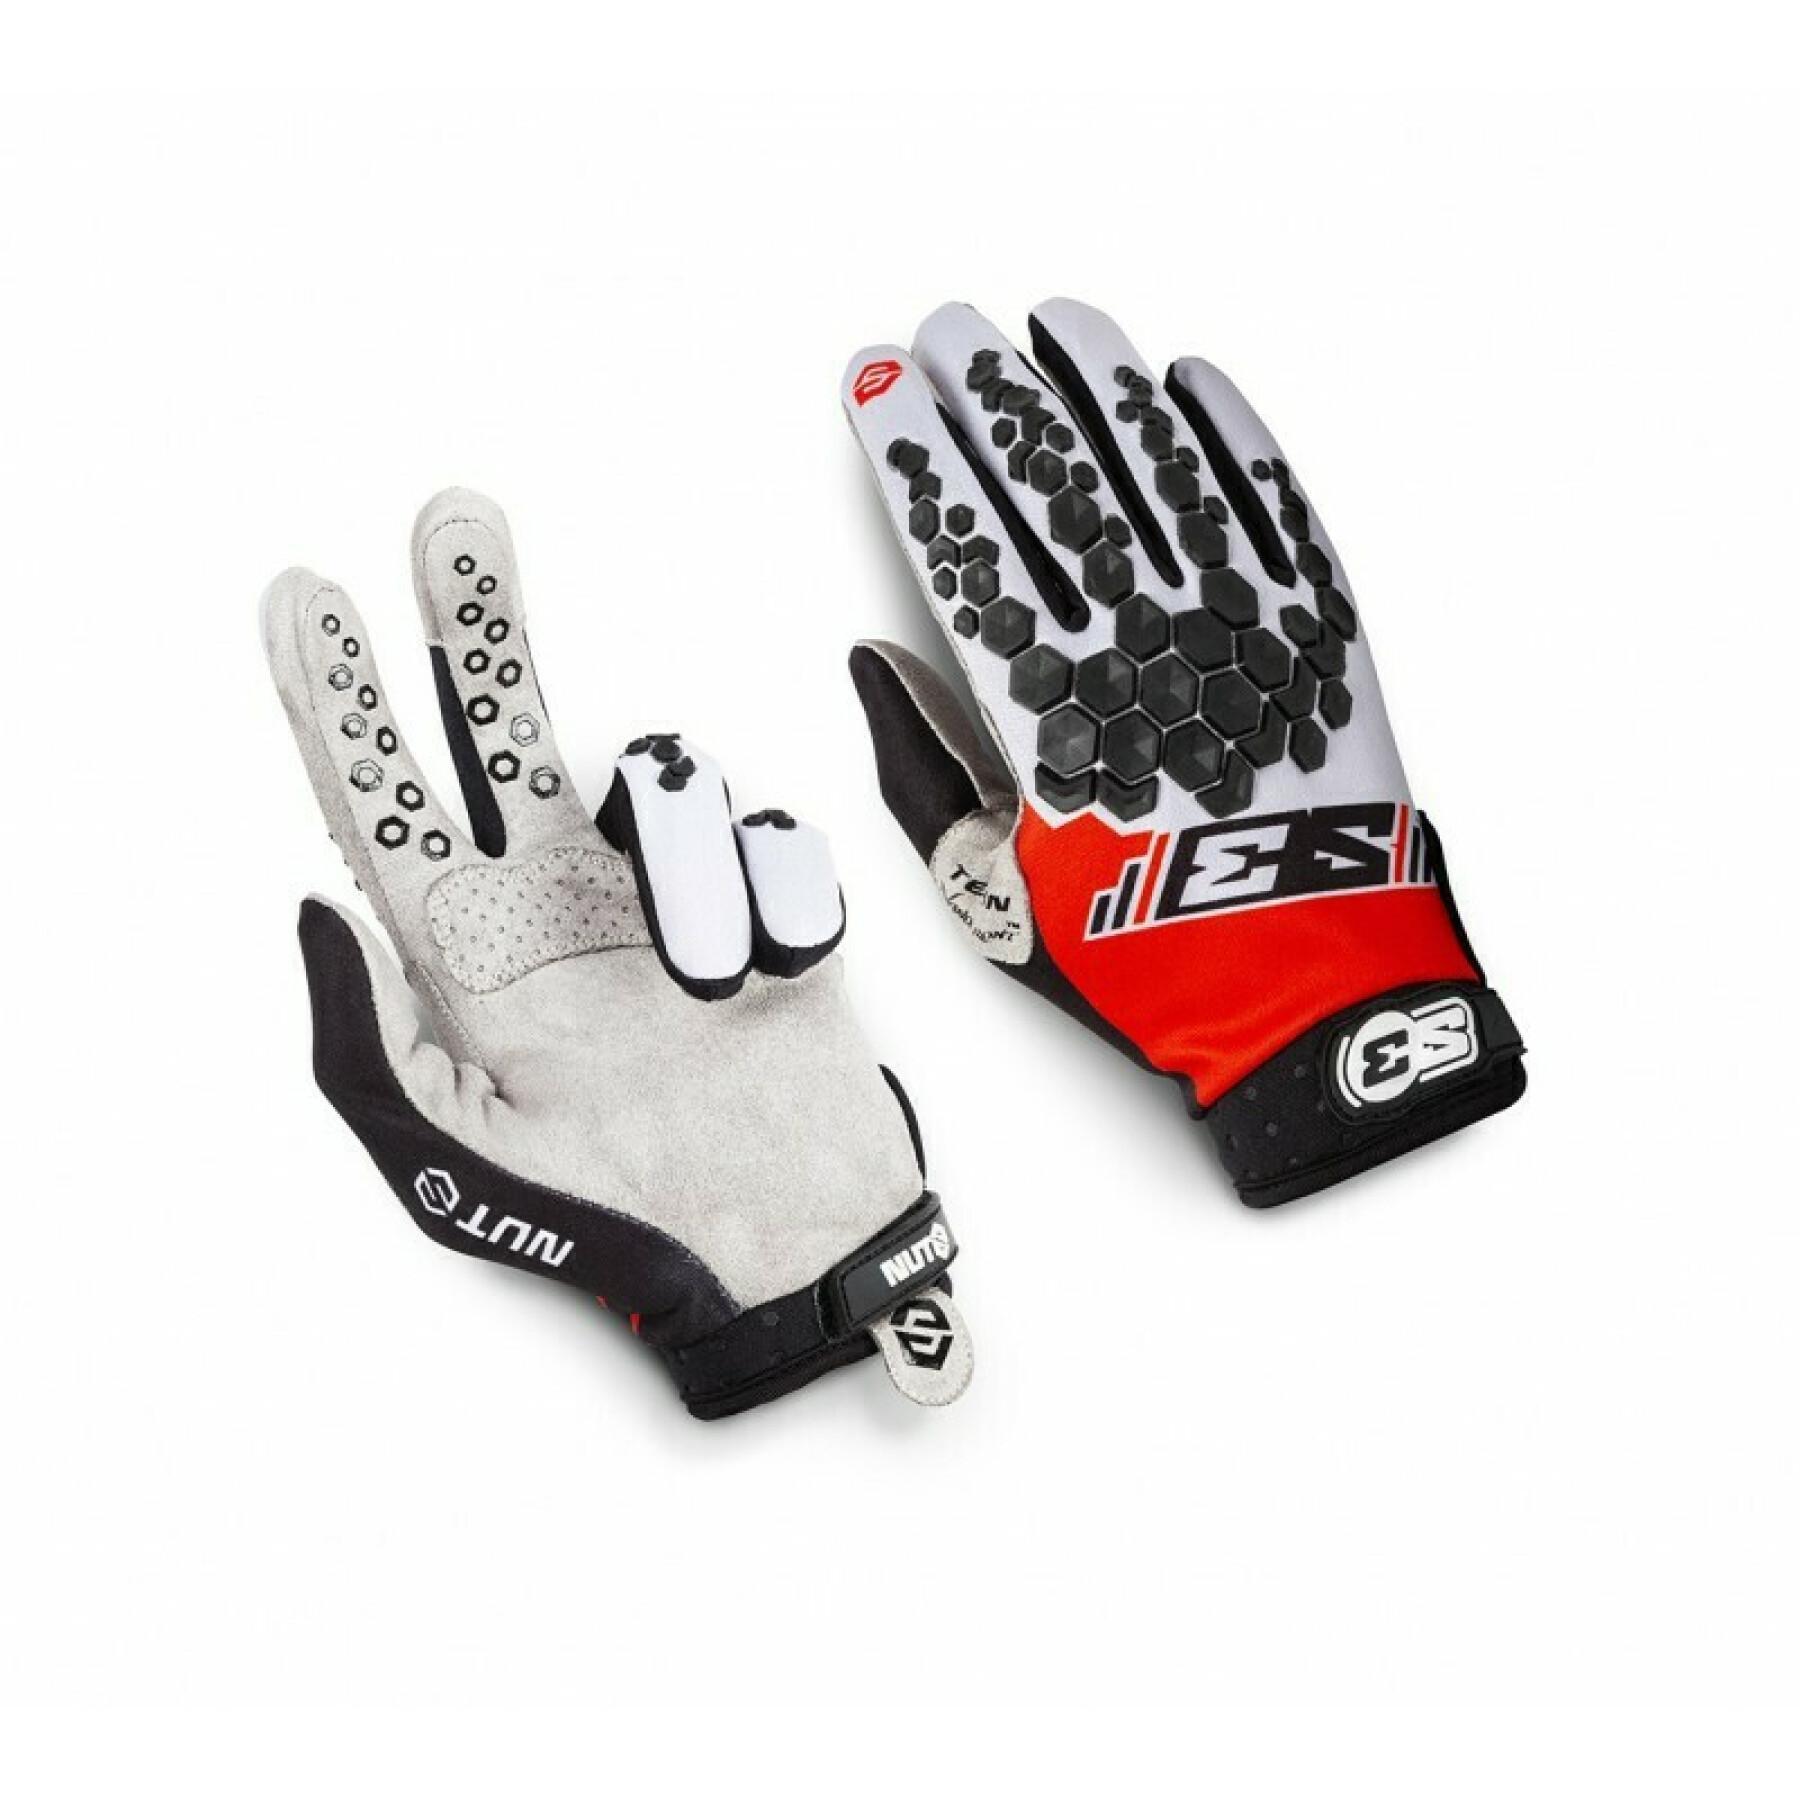 Motorcycle cross gloves S3 Nuts